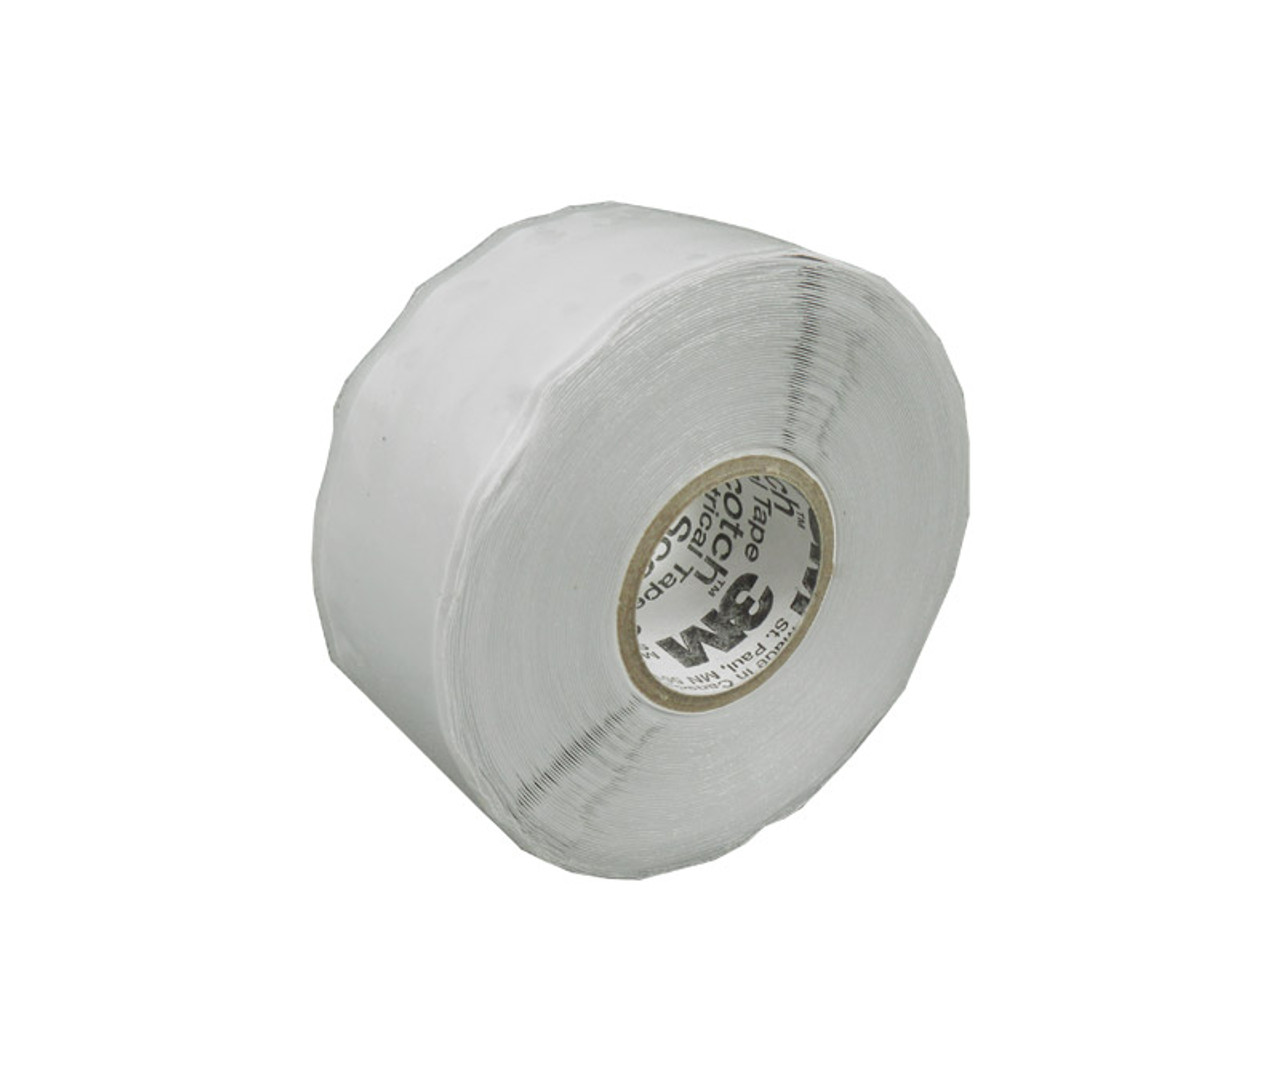 3M™ Venture Tape™ Double Coated Tape 3693FLE